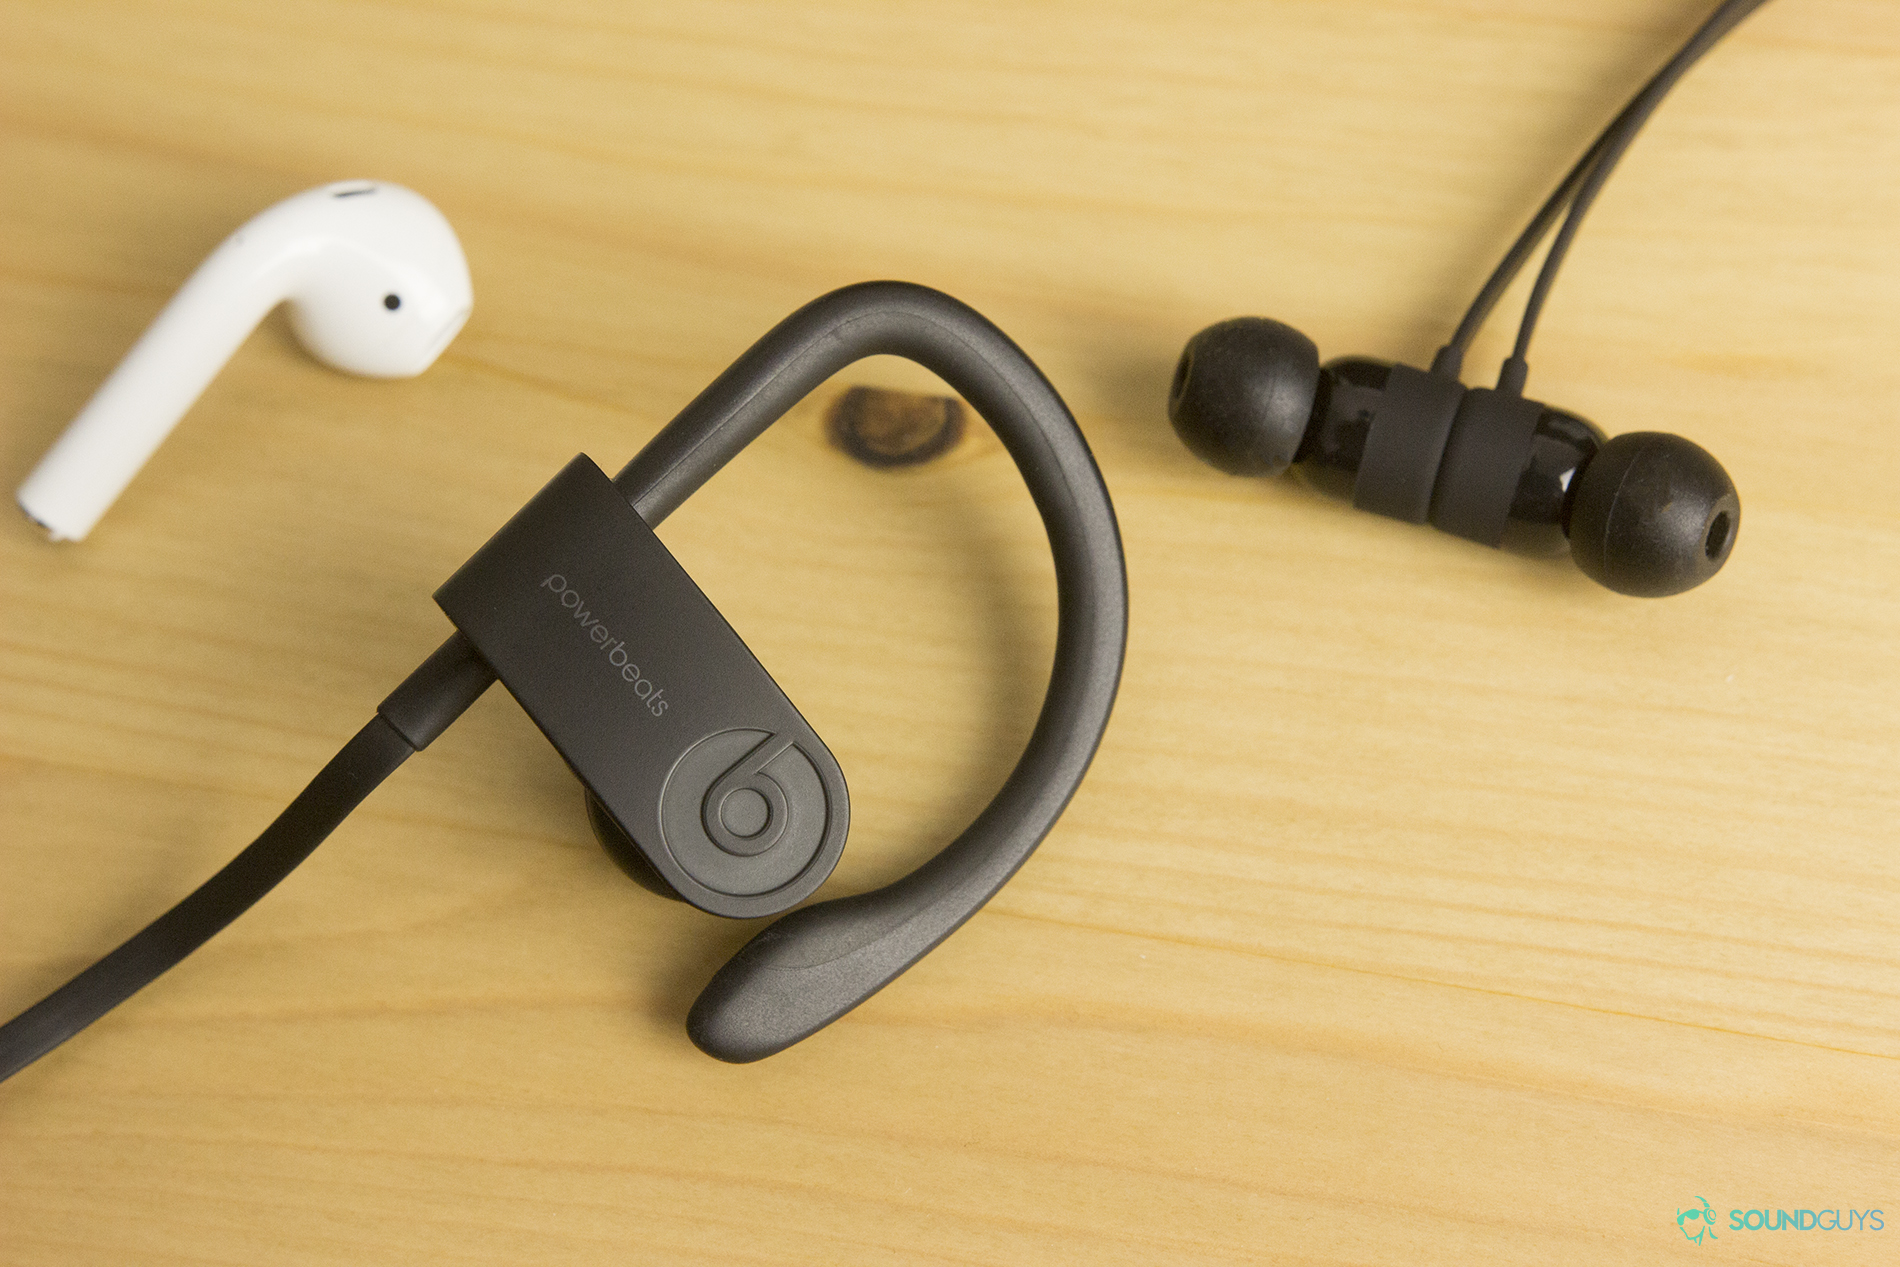 Workout earbuds: What separates the good from the great?